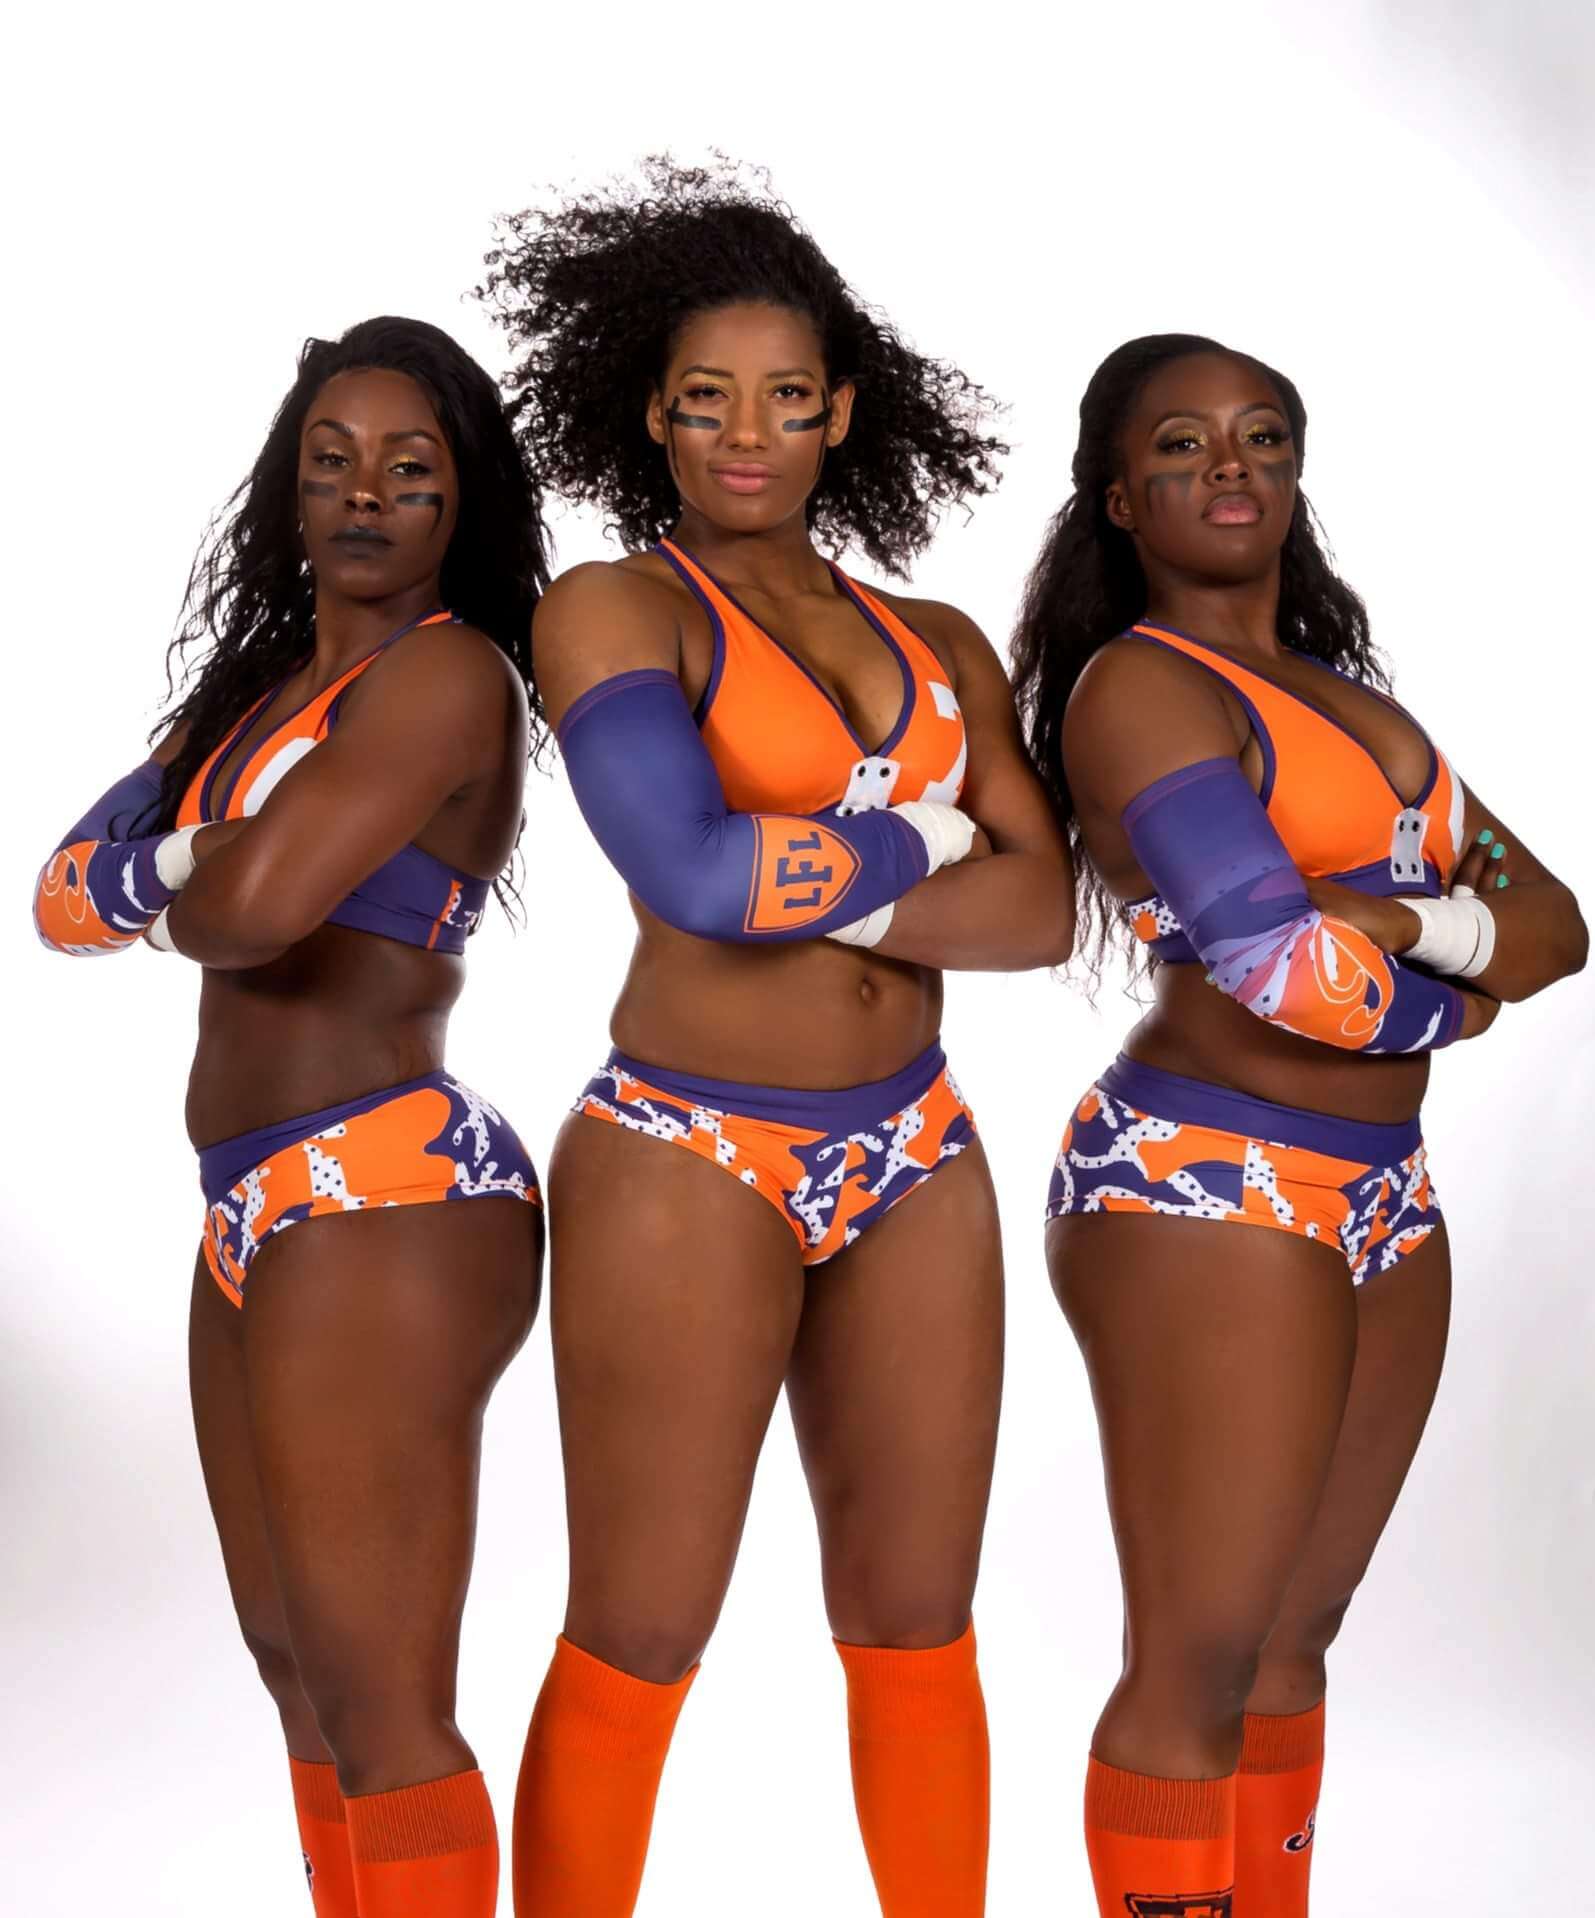 The Legends Football League Beautiful Women And Football, Need We Say Anymore! 151